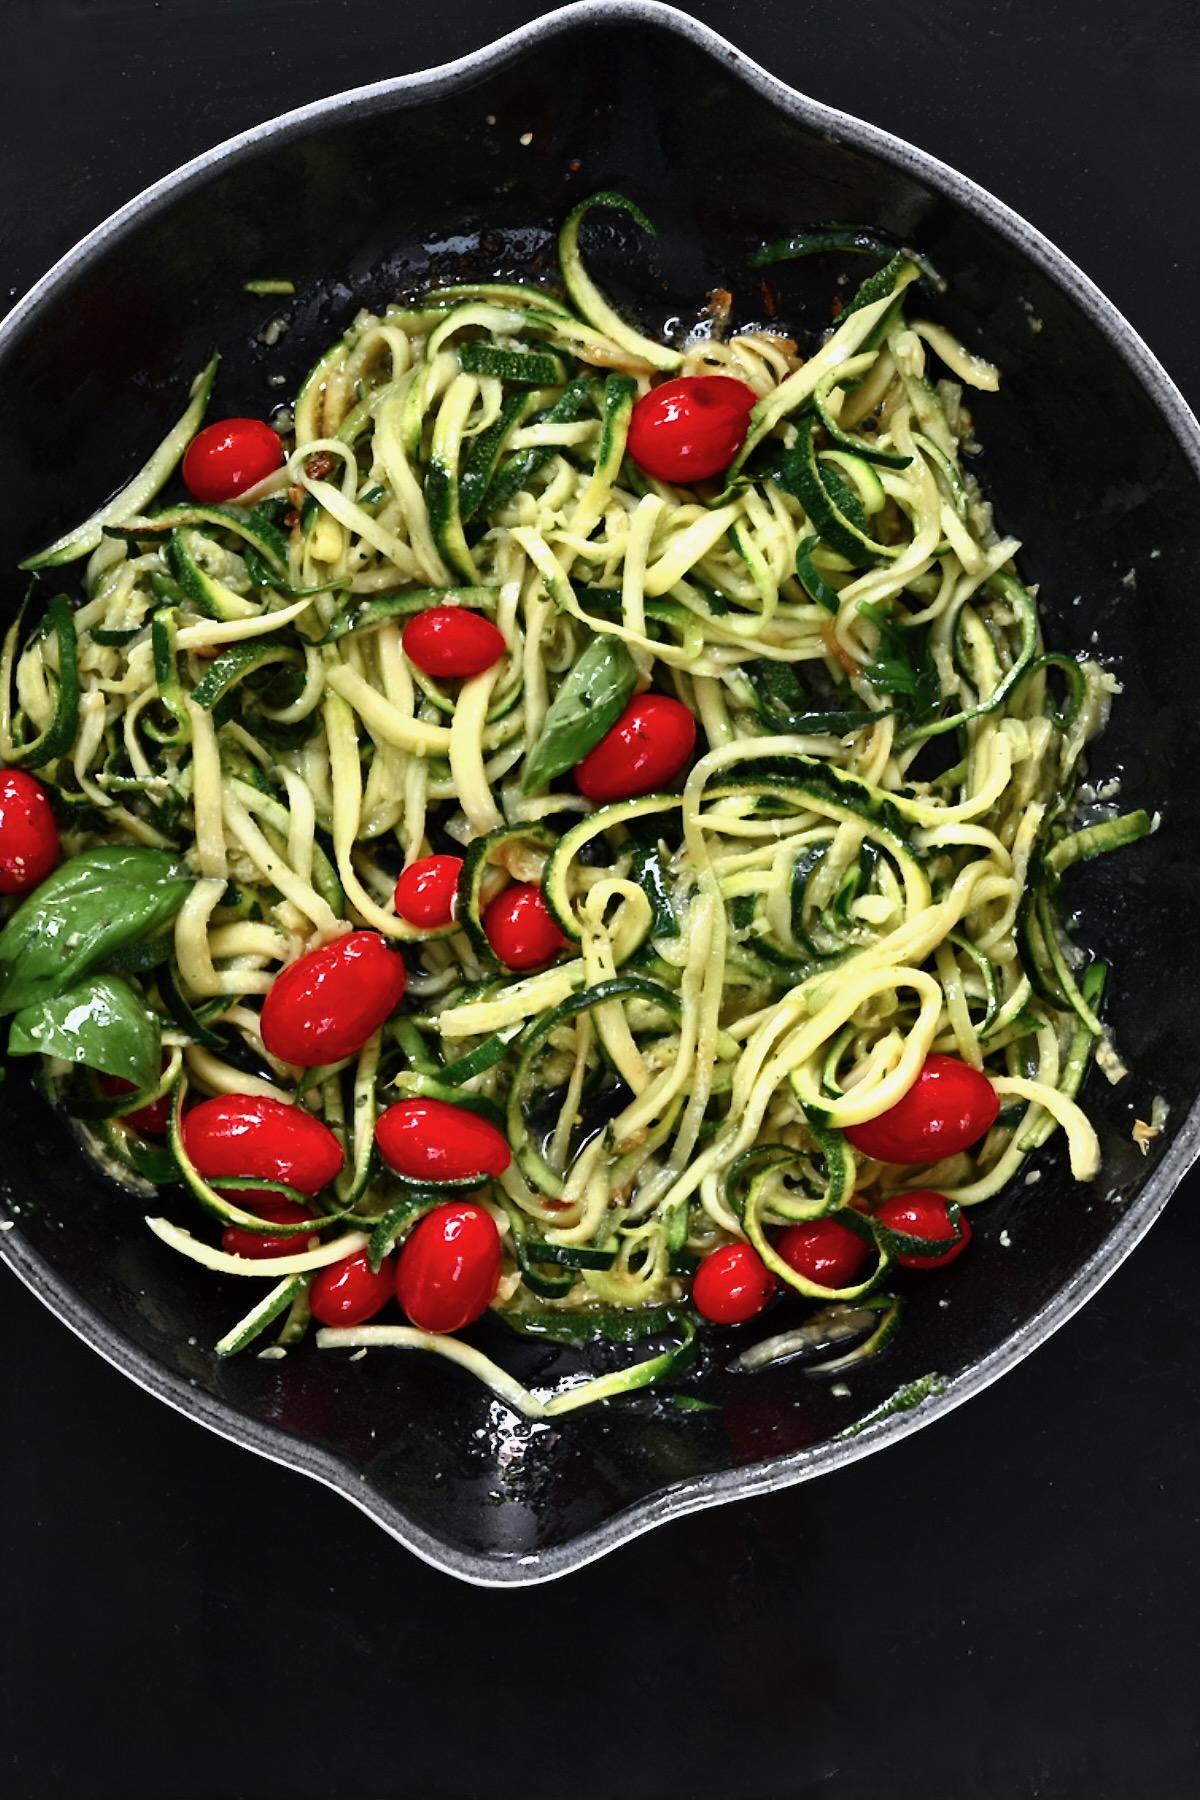 https://www.alphafoodie.com/wp-content/uploads/2022/07/Zoodles-1-of-1-1.jpeg